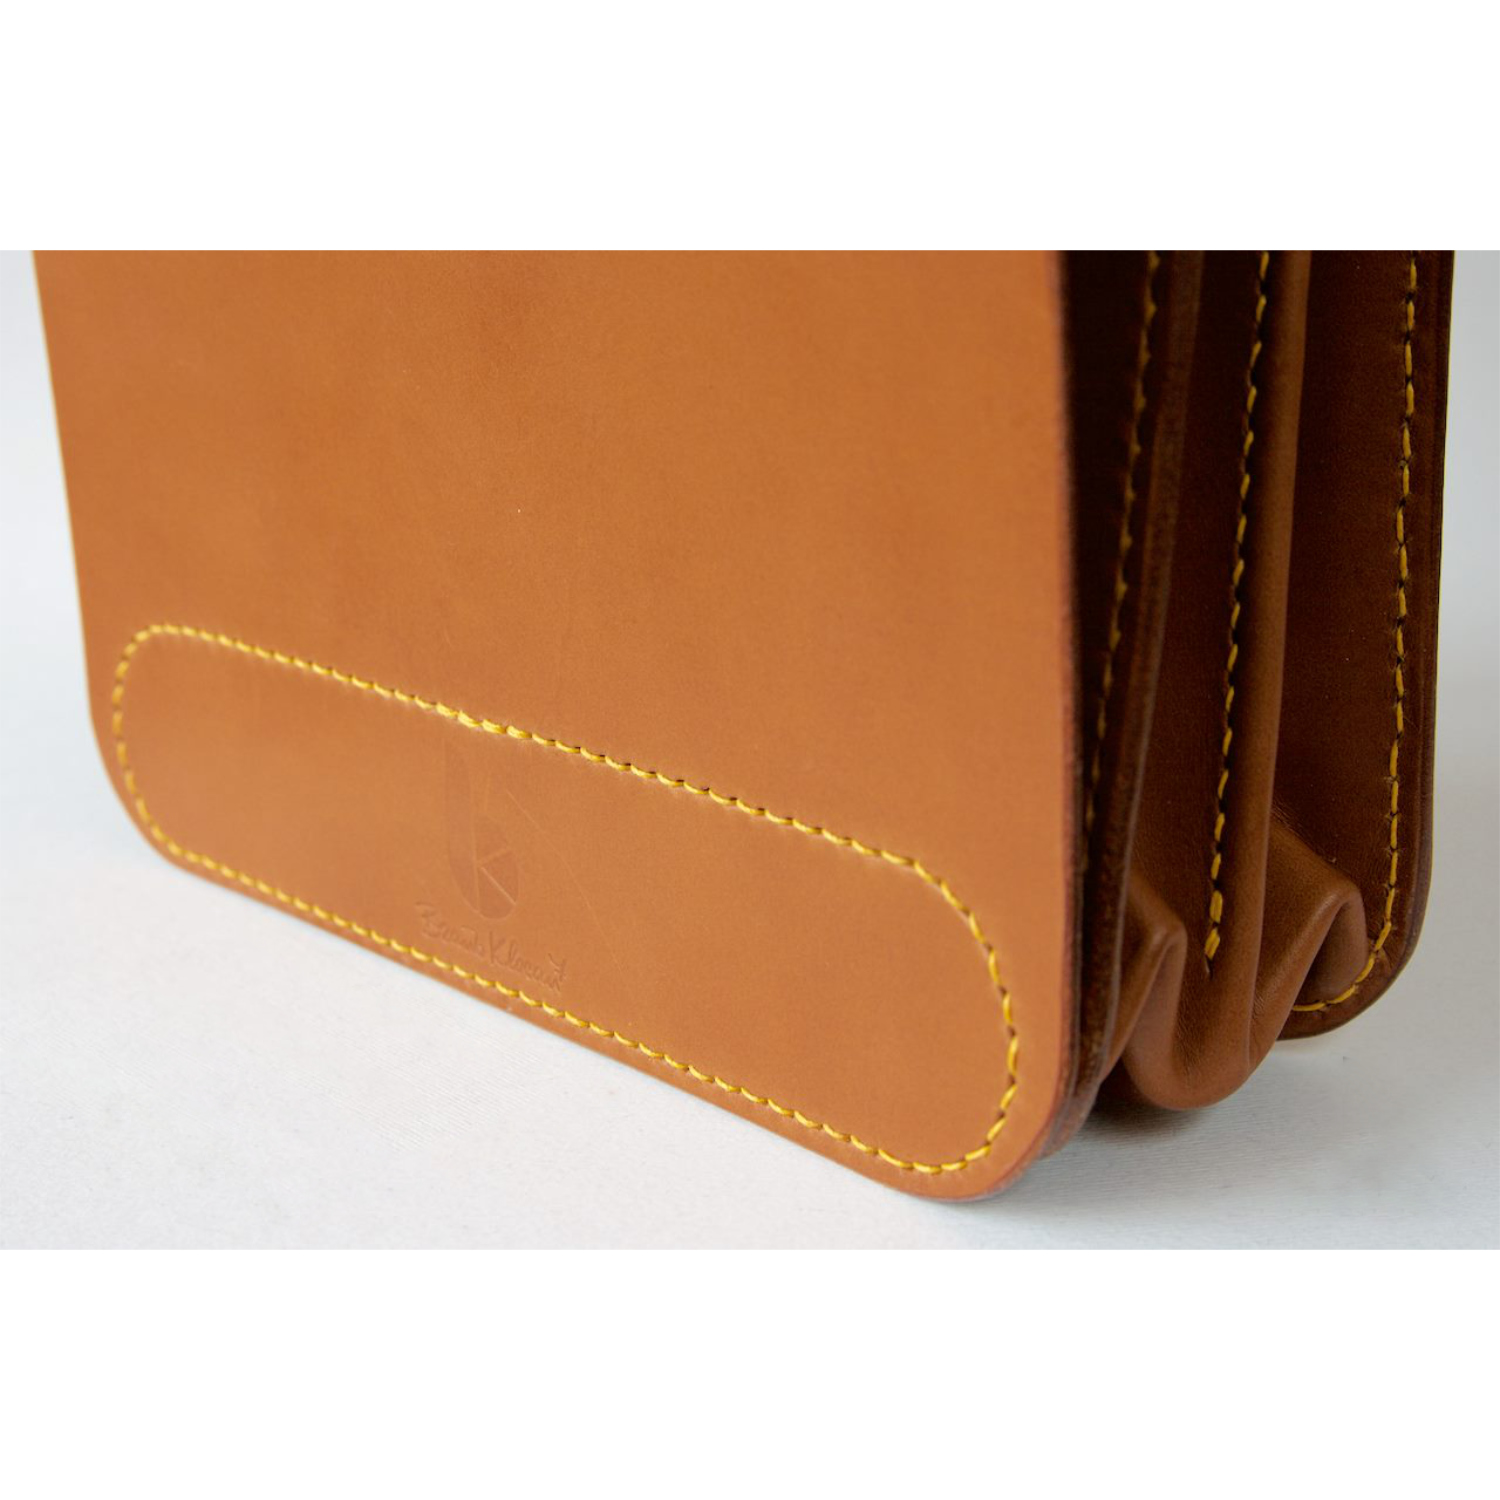 leather messenger bag with cover all flap detail